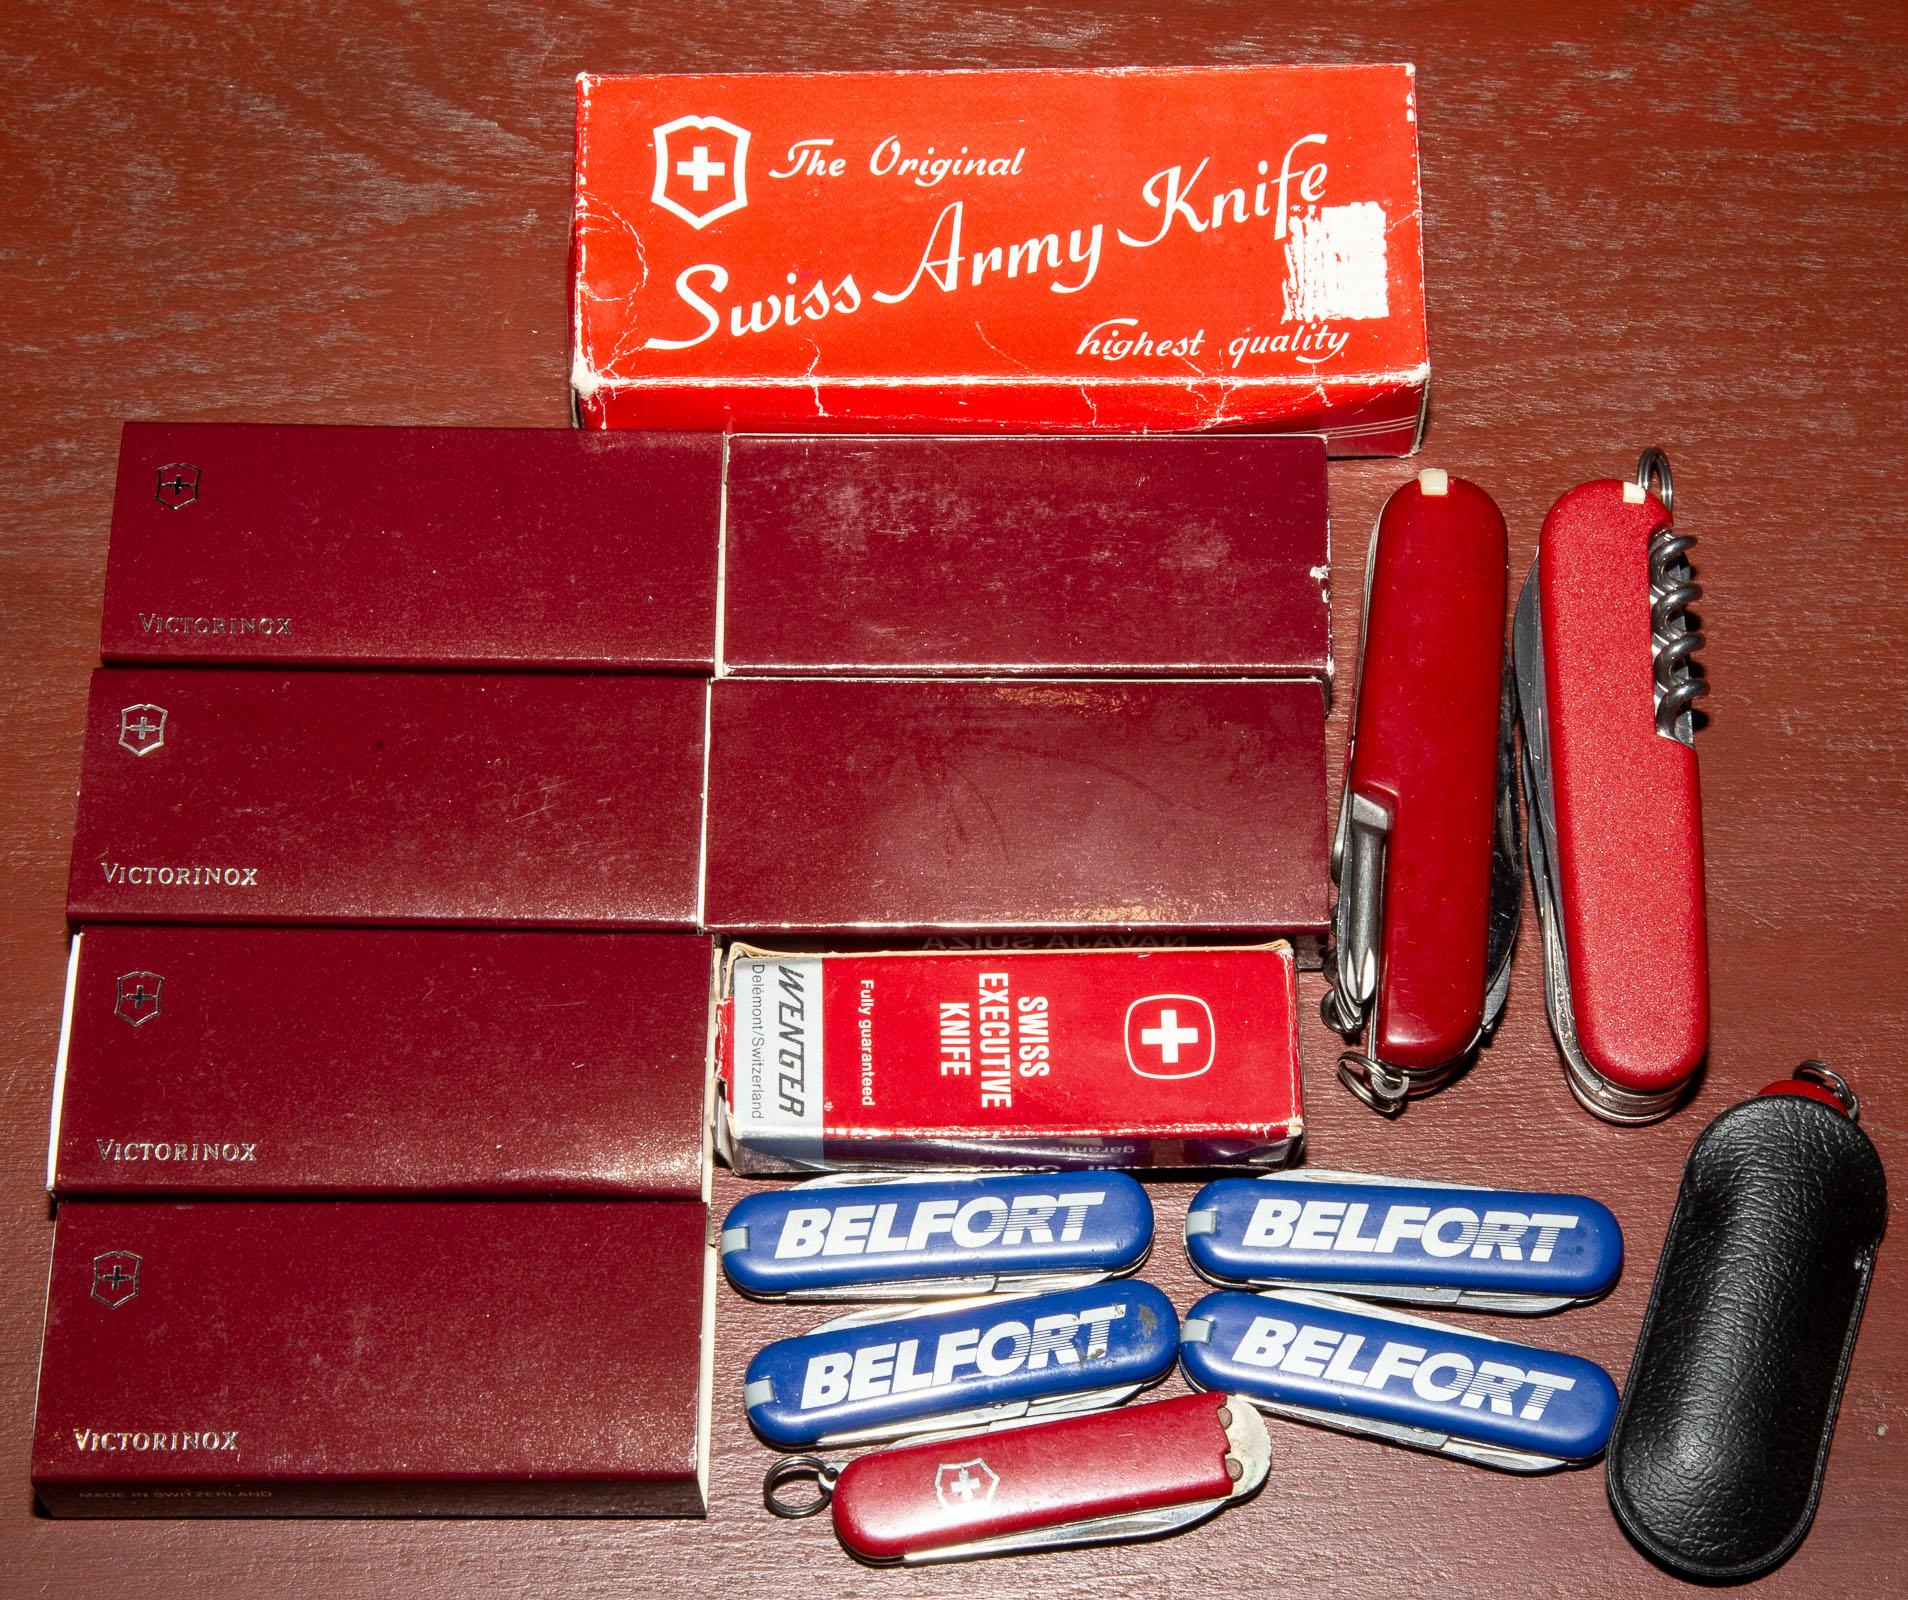 ASSORTED SWISS AMY FOLDING KNIVES